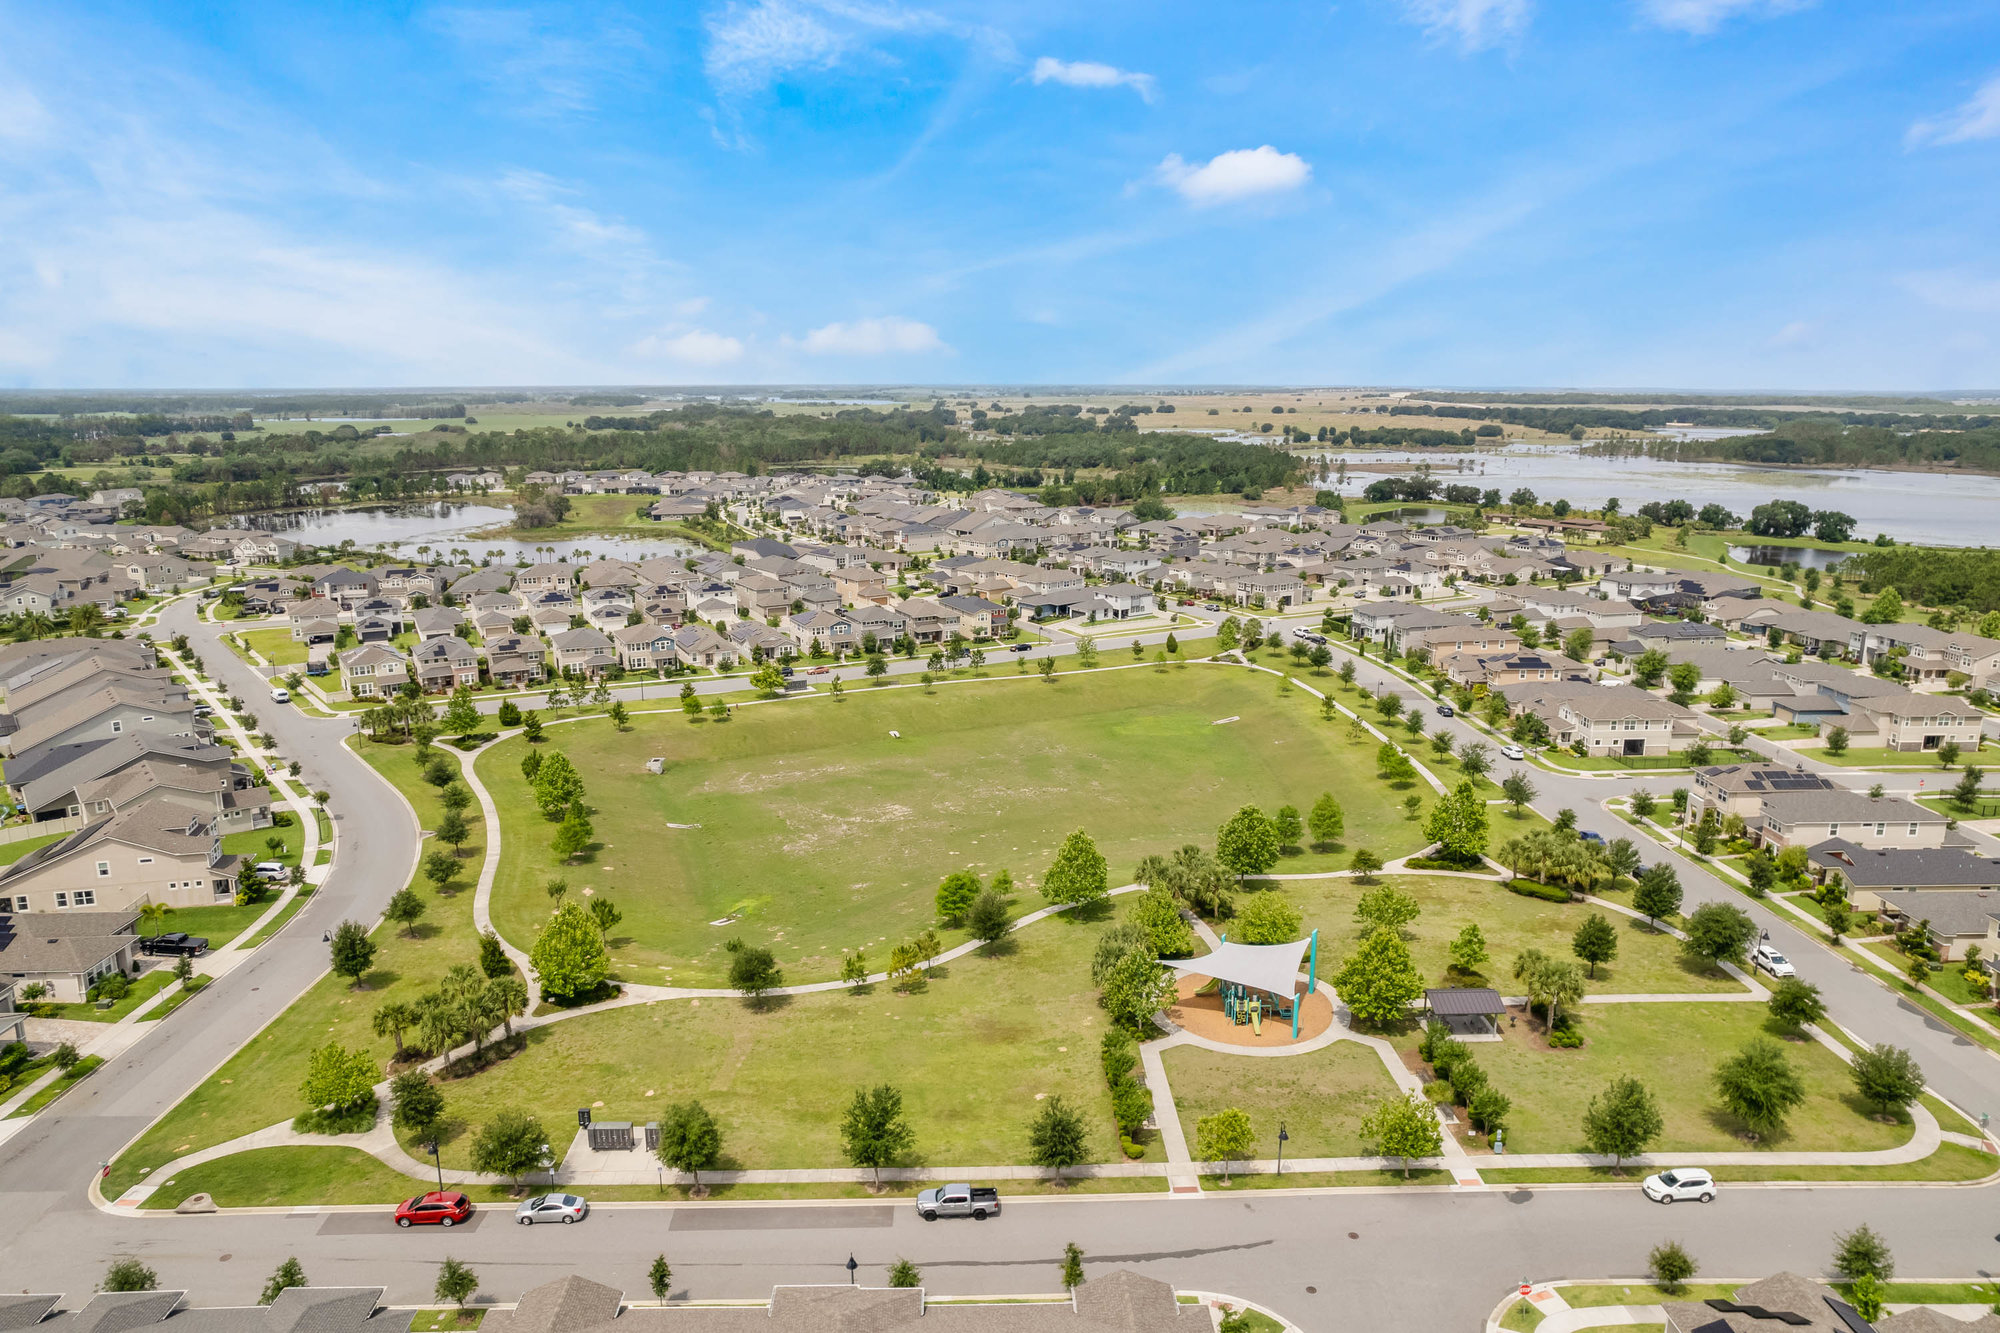 drone shot of hawksmoor community with large field